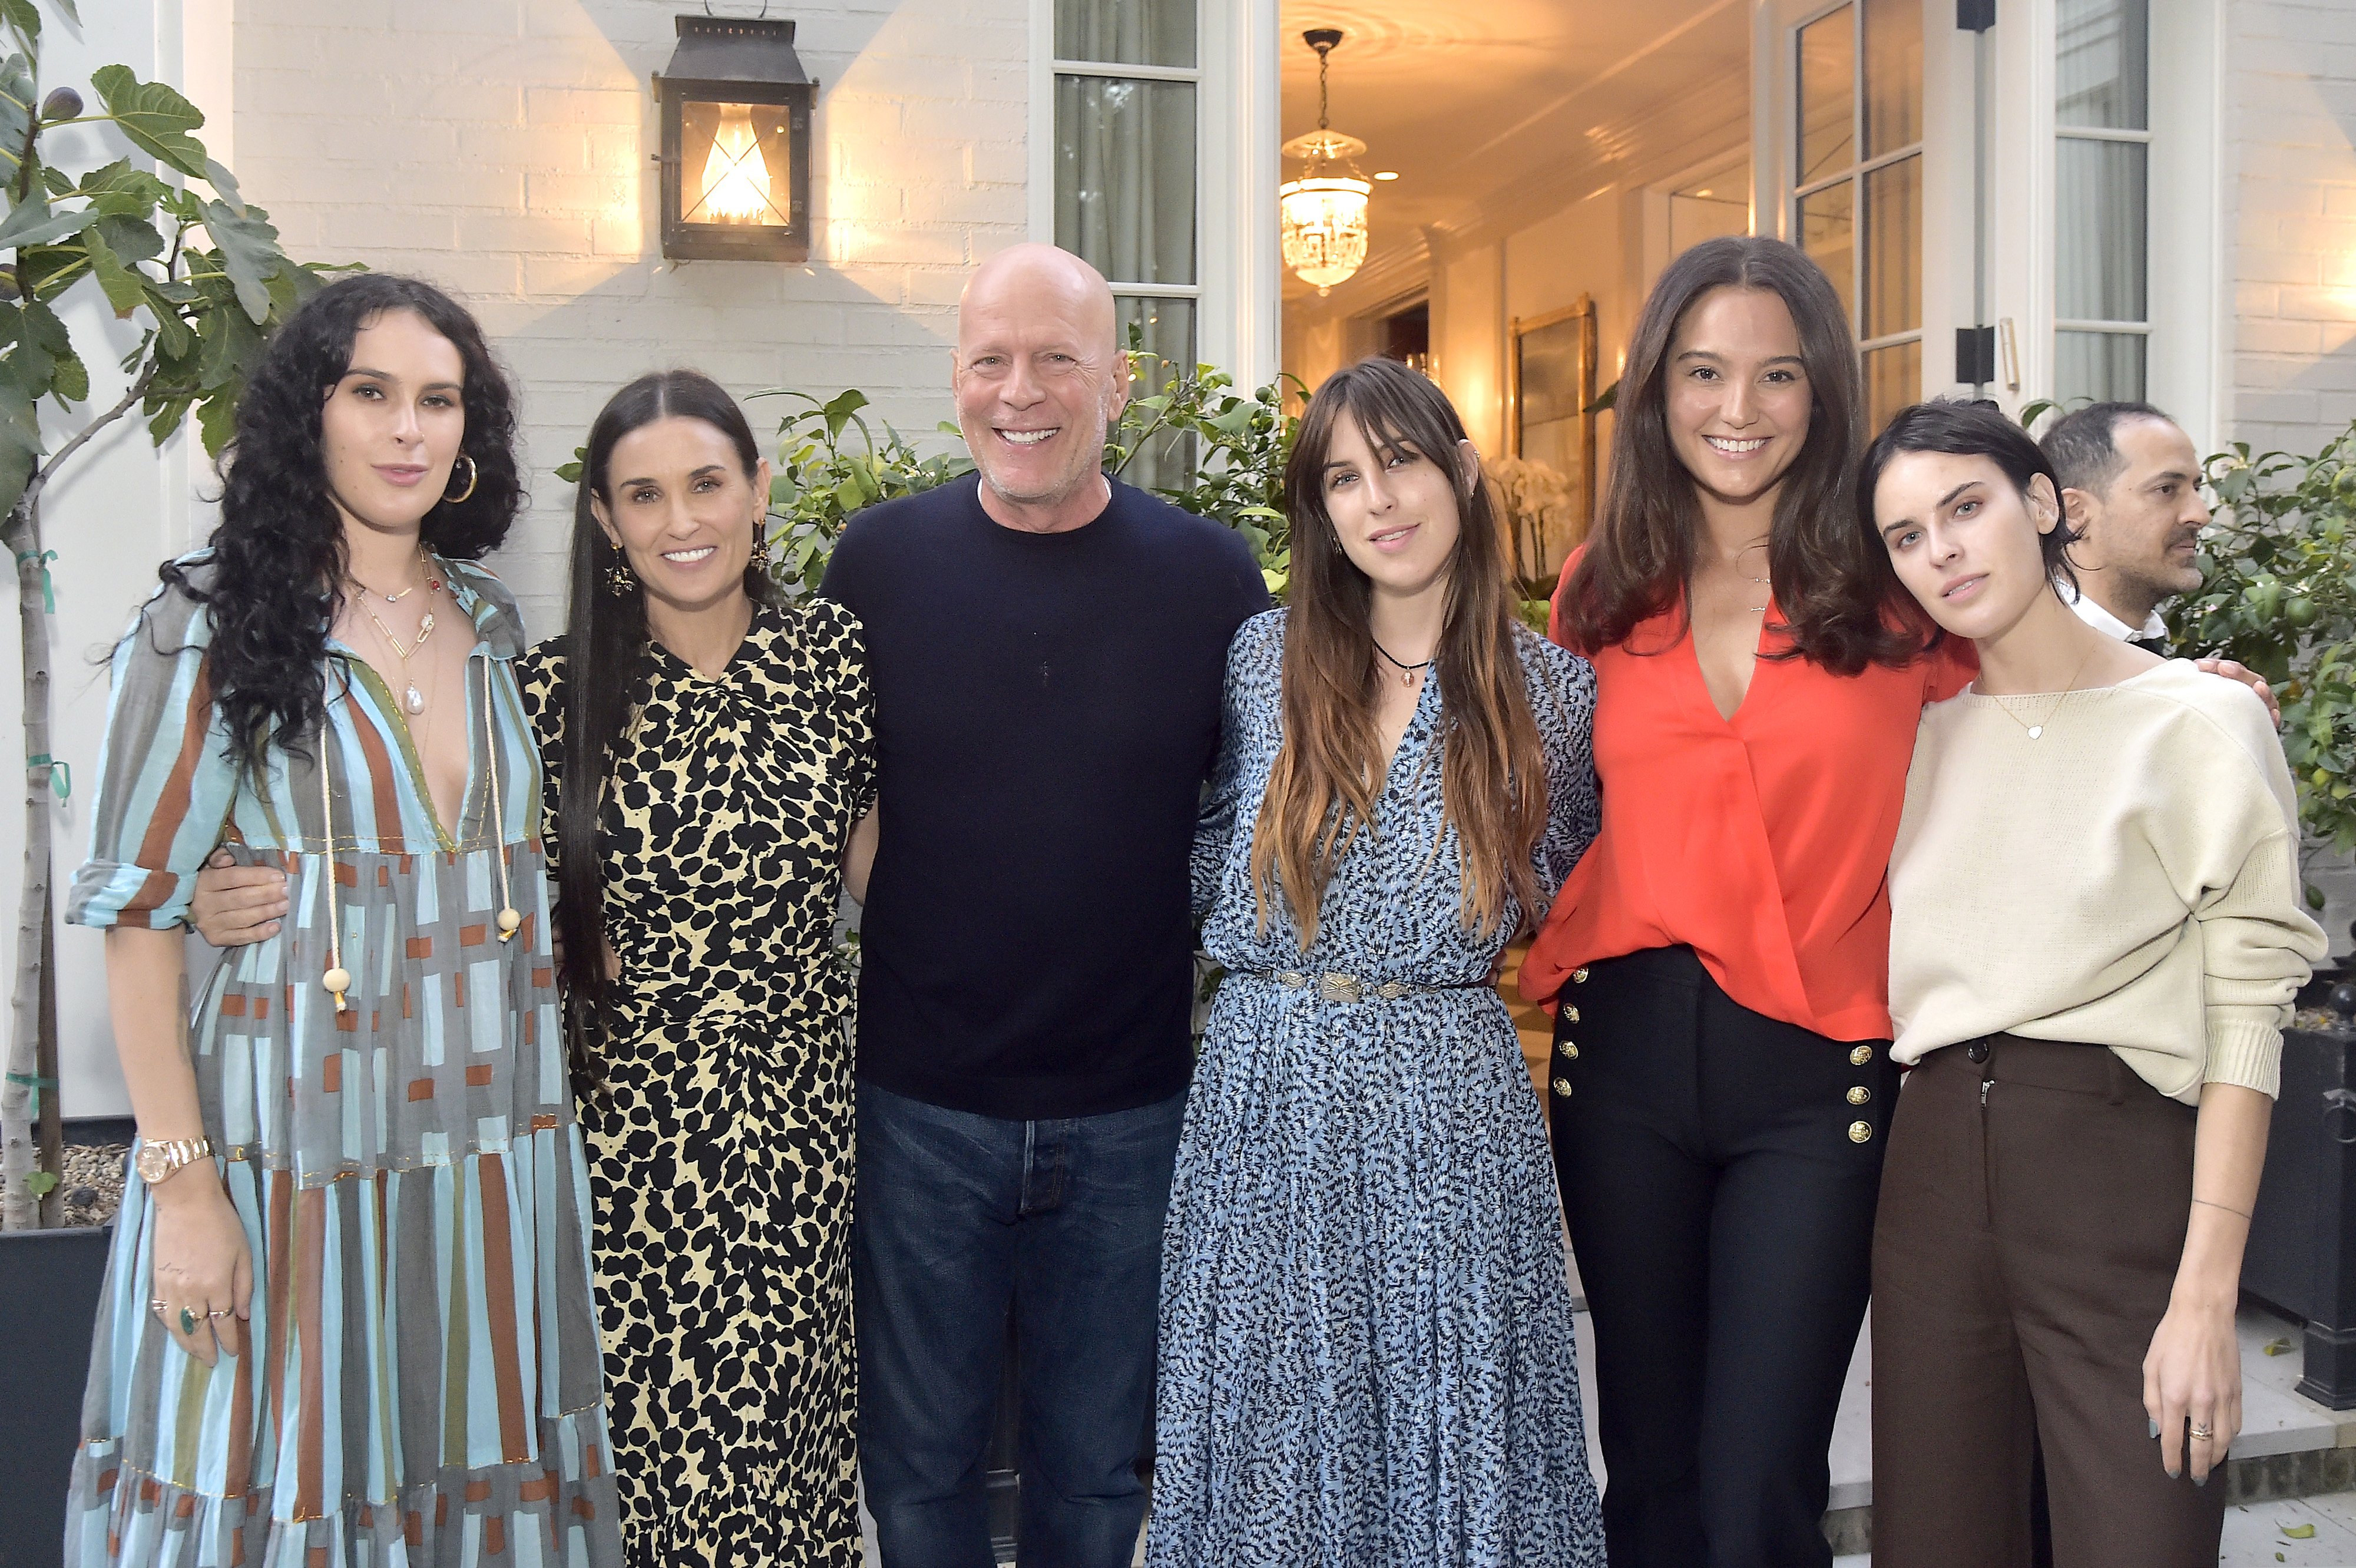 Rumer Willis, Demi Moore, Bruce Willis, Scout Willis, Emma Heming Willis and Tallulah Willis on September 23, 2019 in Los Angeles, California | Source: Getty Images